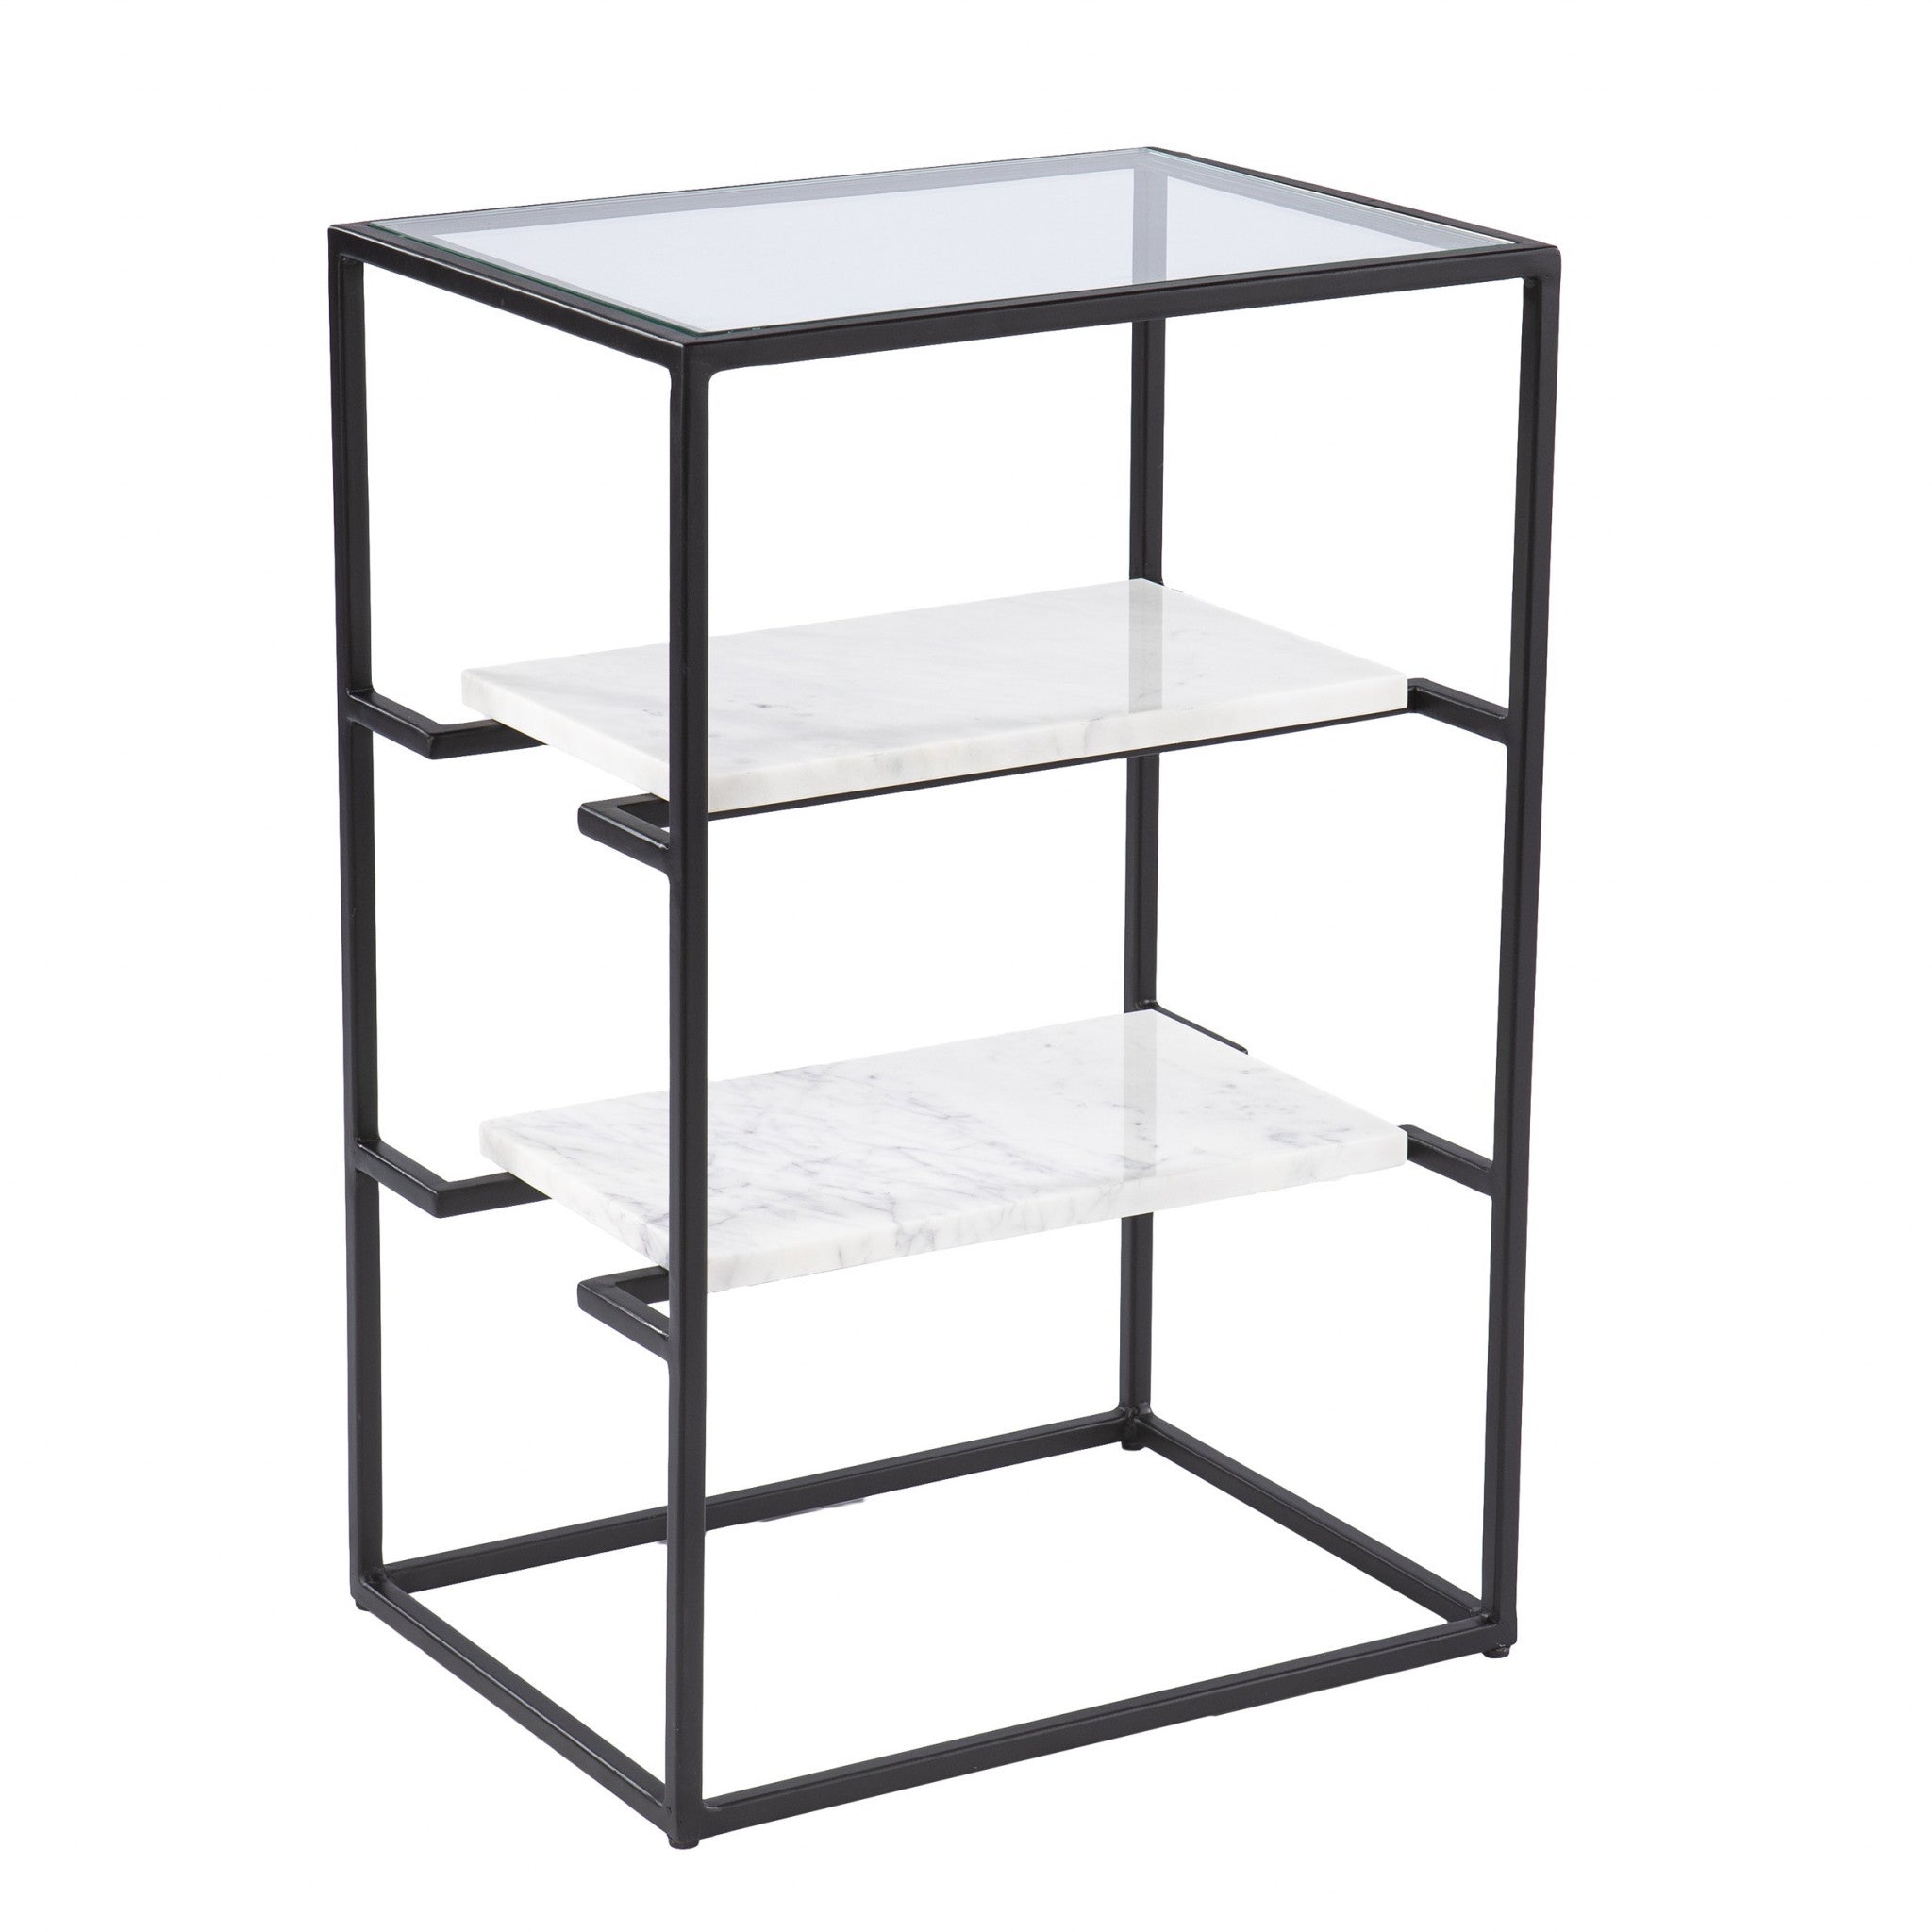 24" Black Glass and Marble Rectangular End Table With Two Shelves